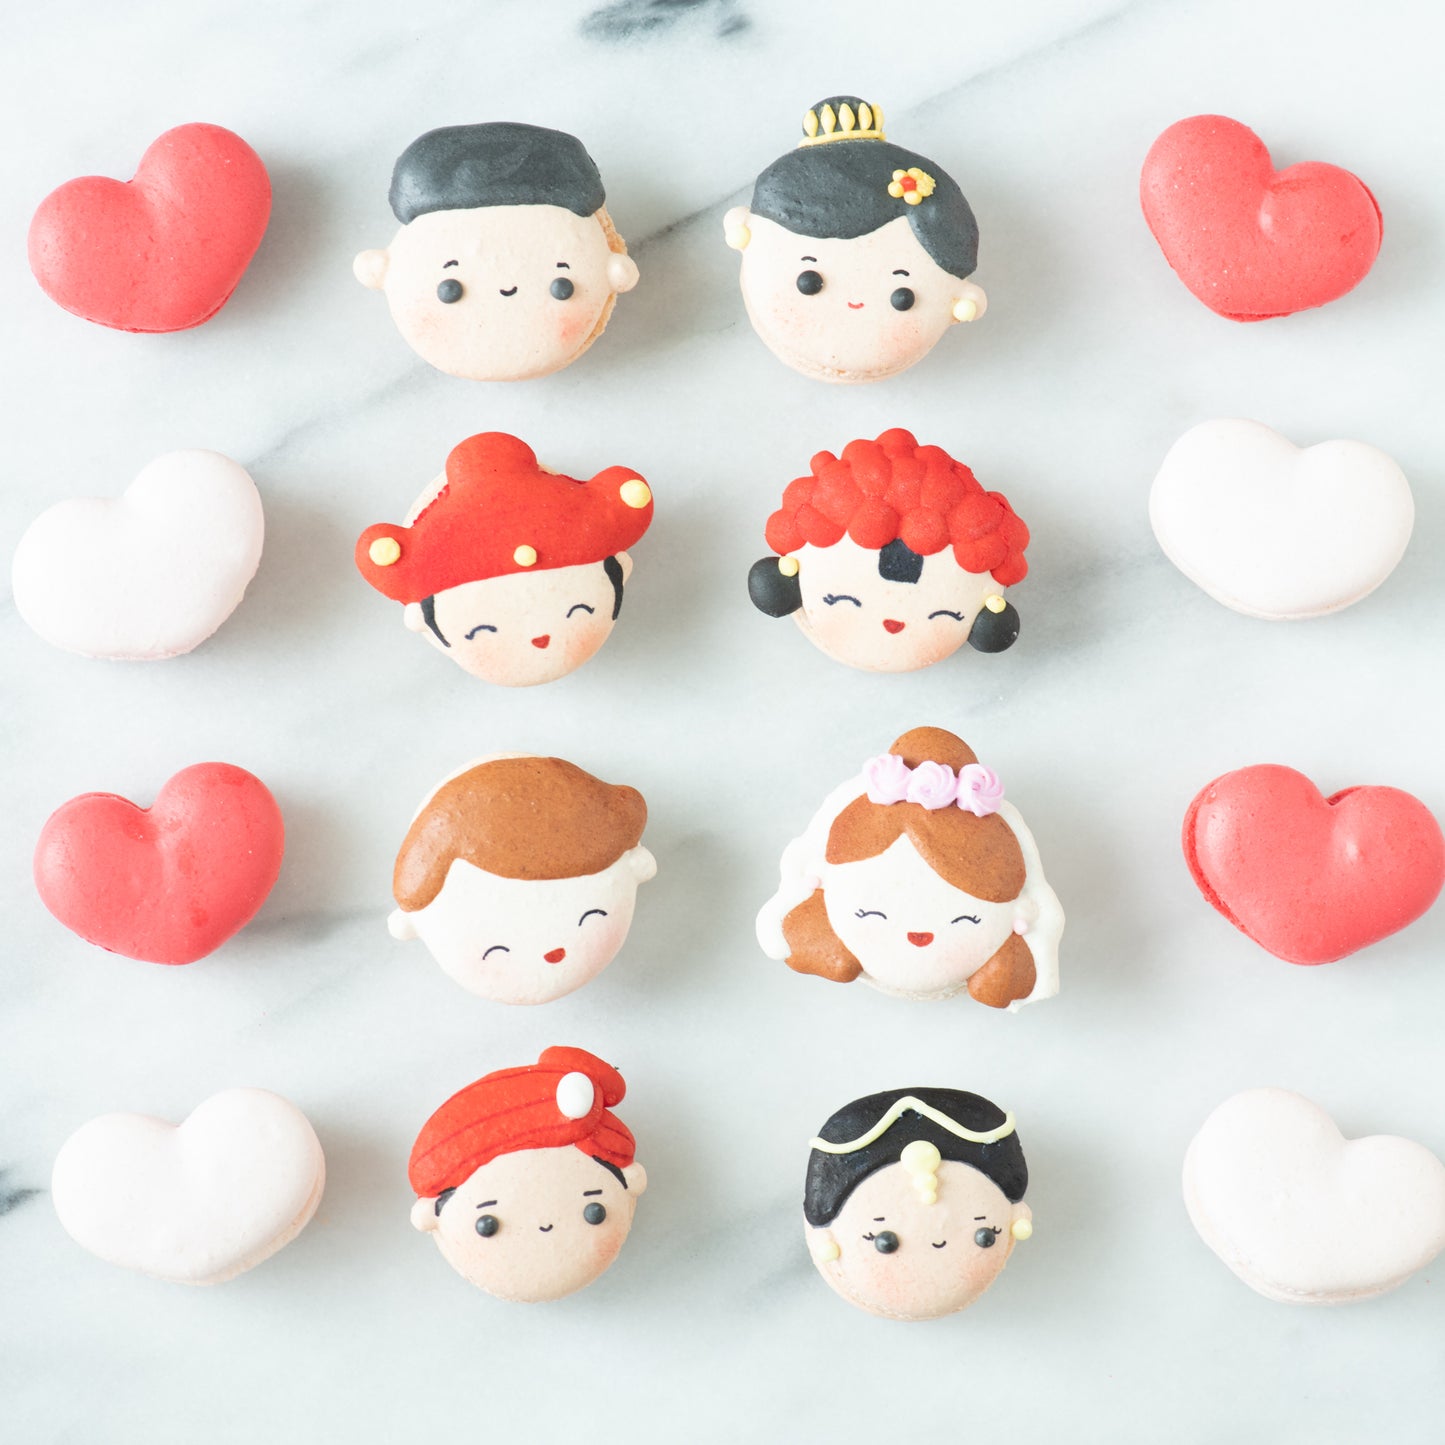 10 pcs Traditional Indian Wedding Couple Macarons in a Gift Box | Complimentary Ribbon and Personalised Message | $38.80 Nett